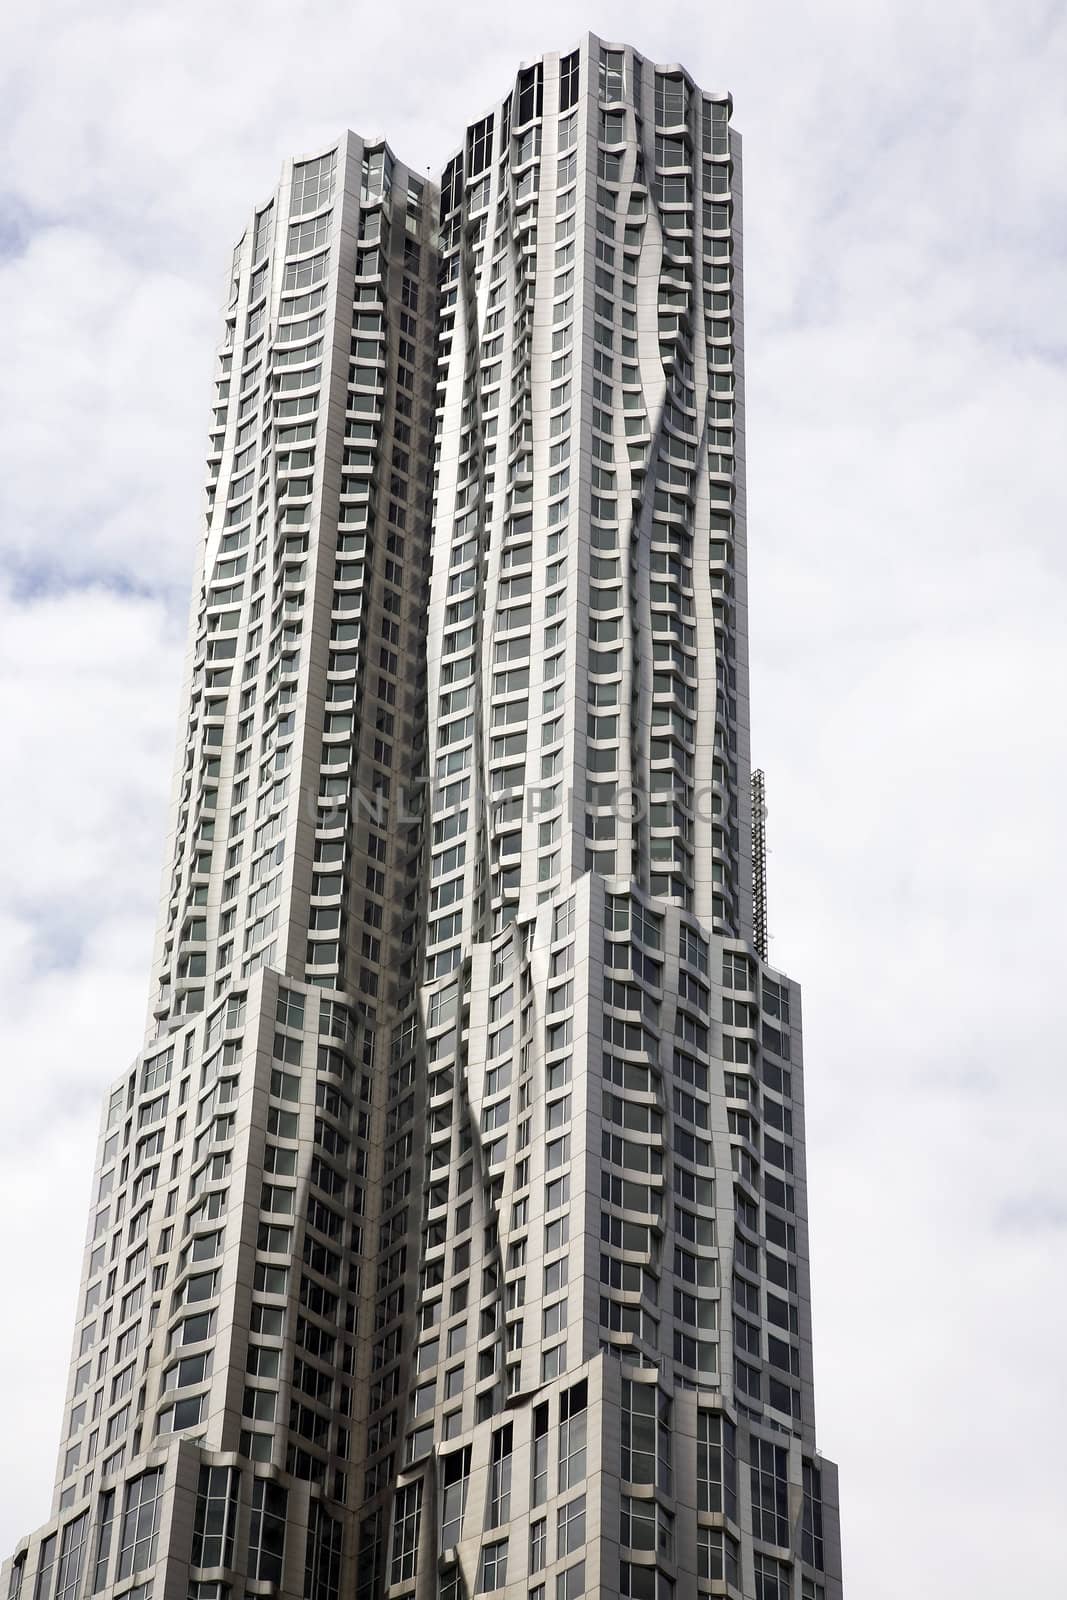 NEW YORK CITY - MAY 24, 2011: Frank Gehry's Beekman Tower contains luxury apartments and stands as the 8th tallest building in the city.